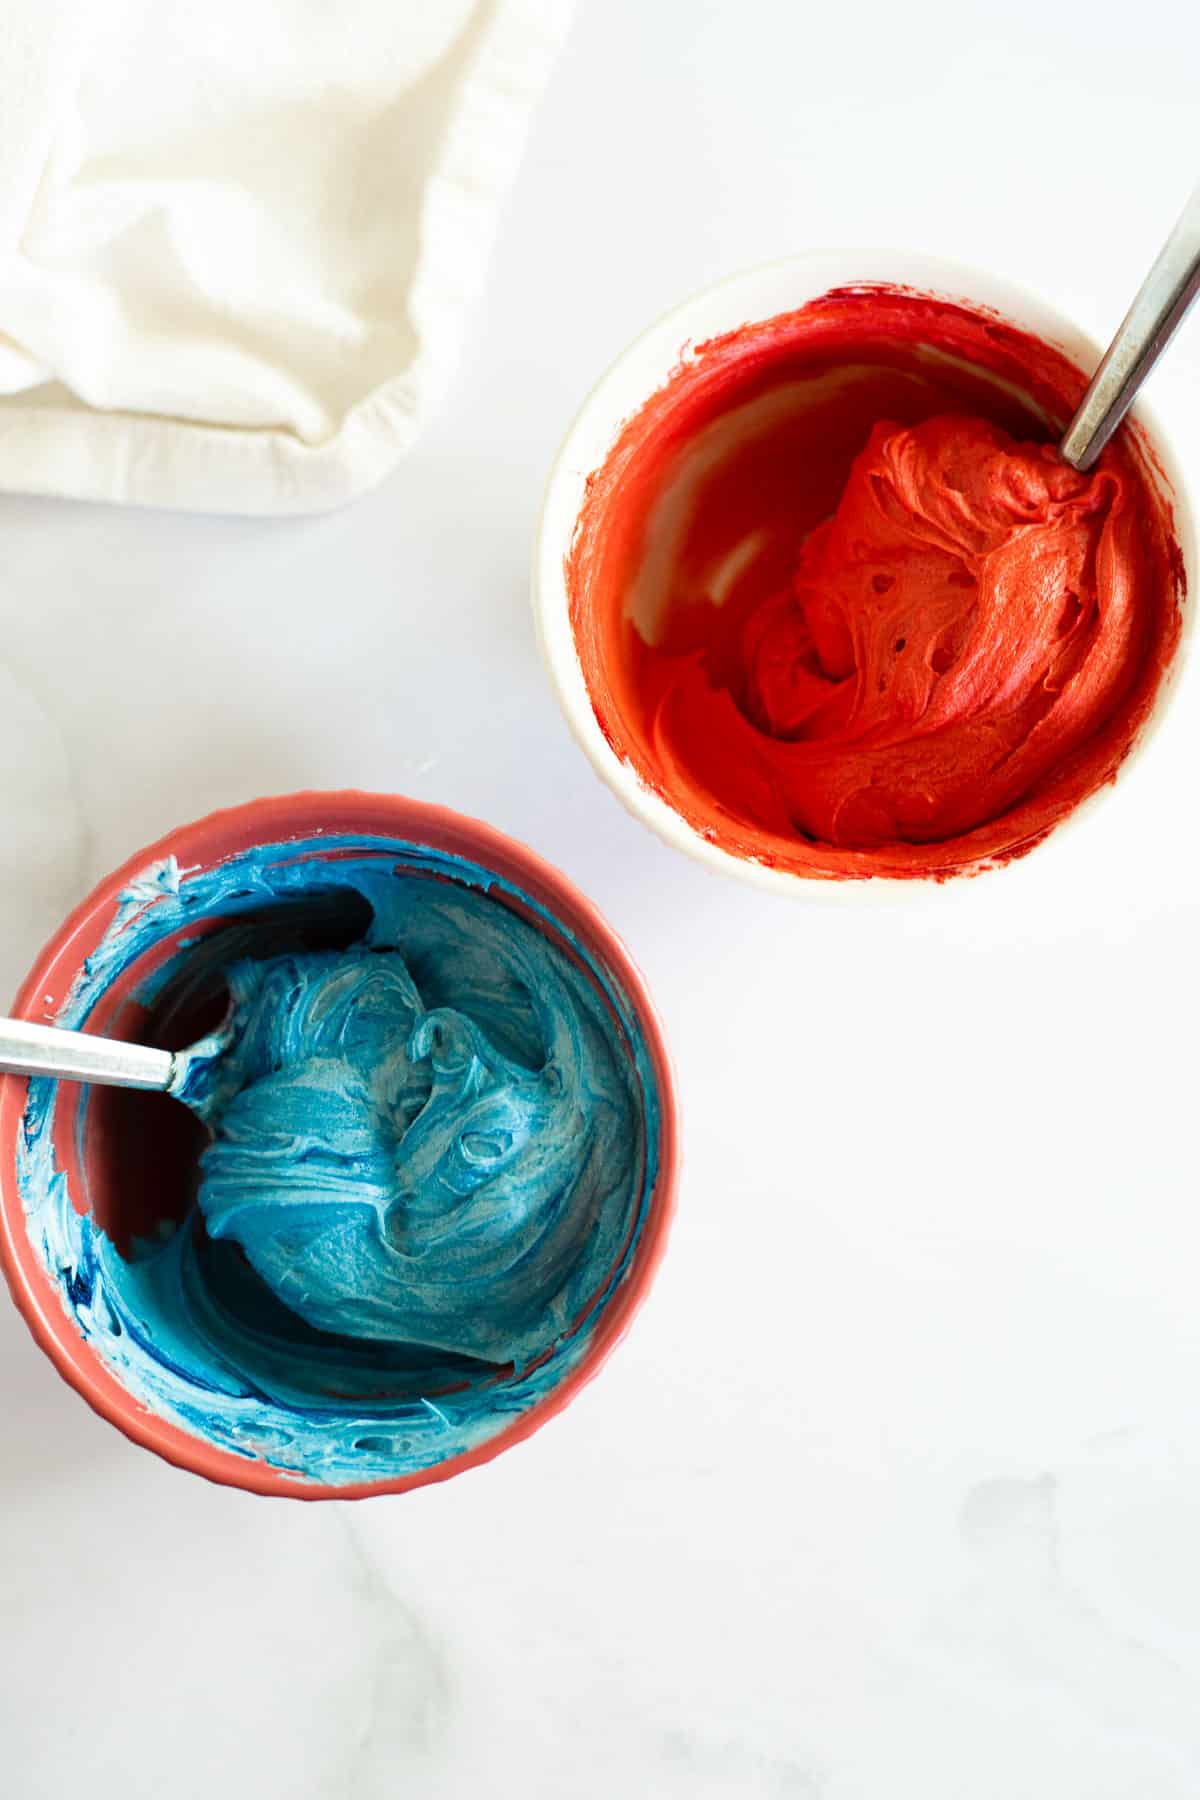 two small bowls of icing dyed red and blue.